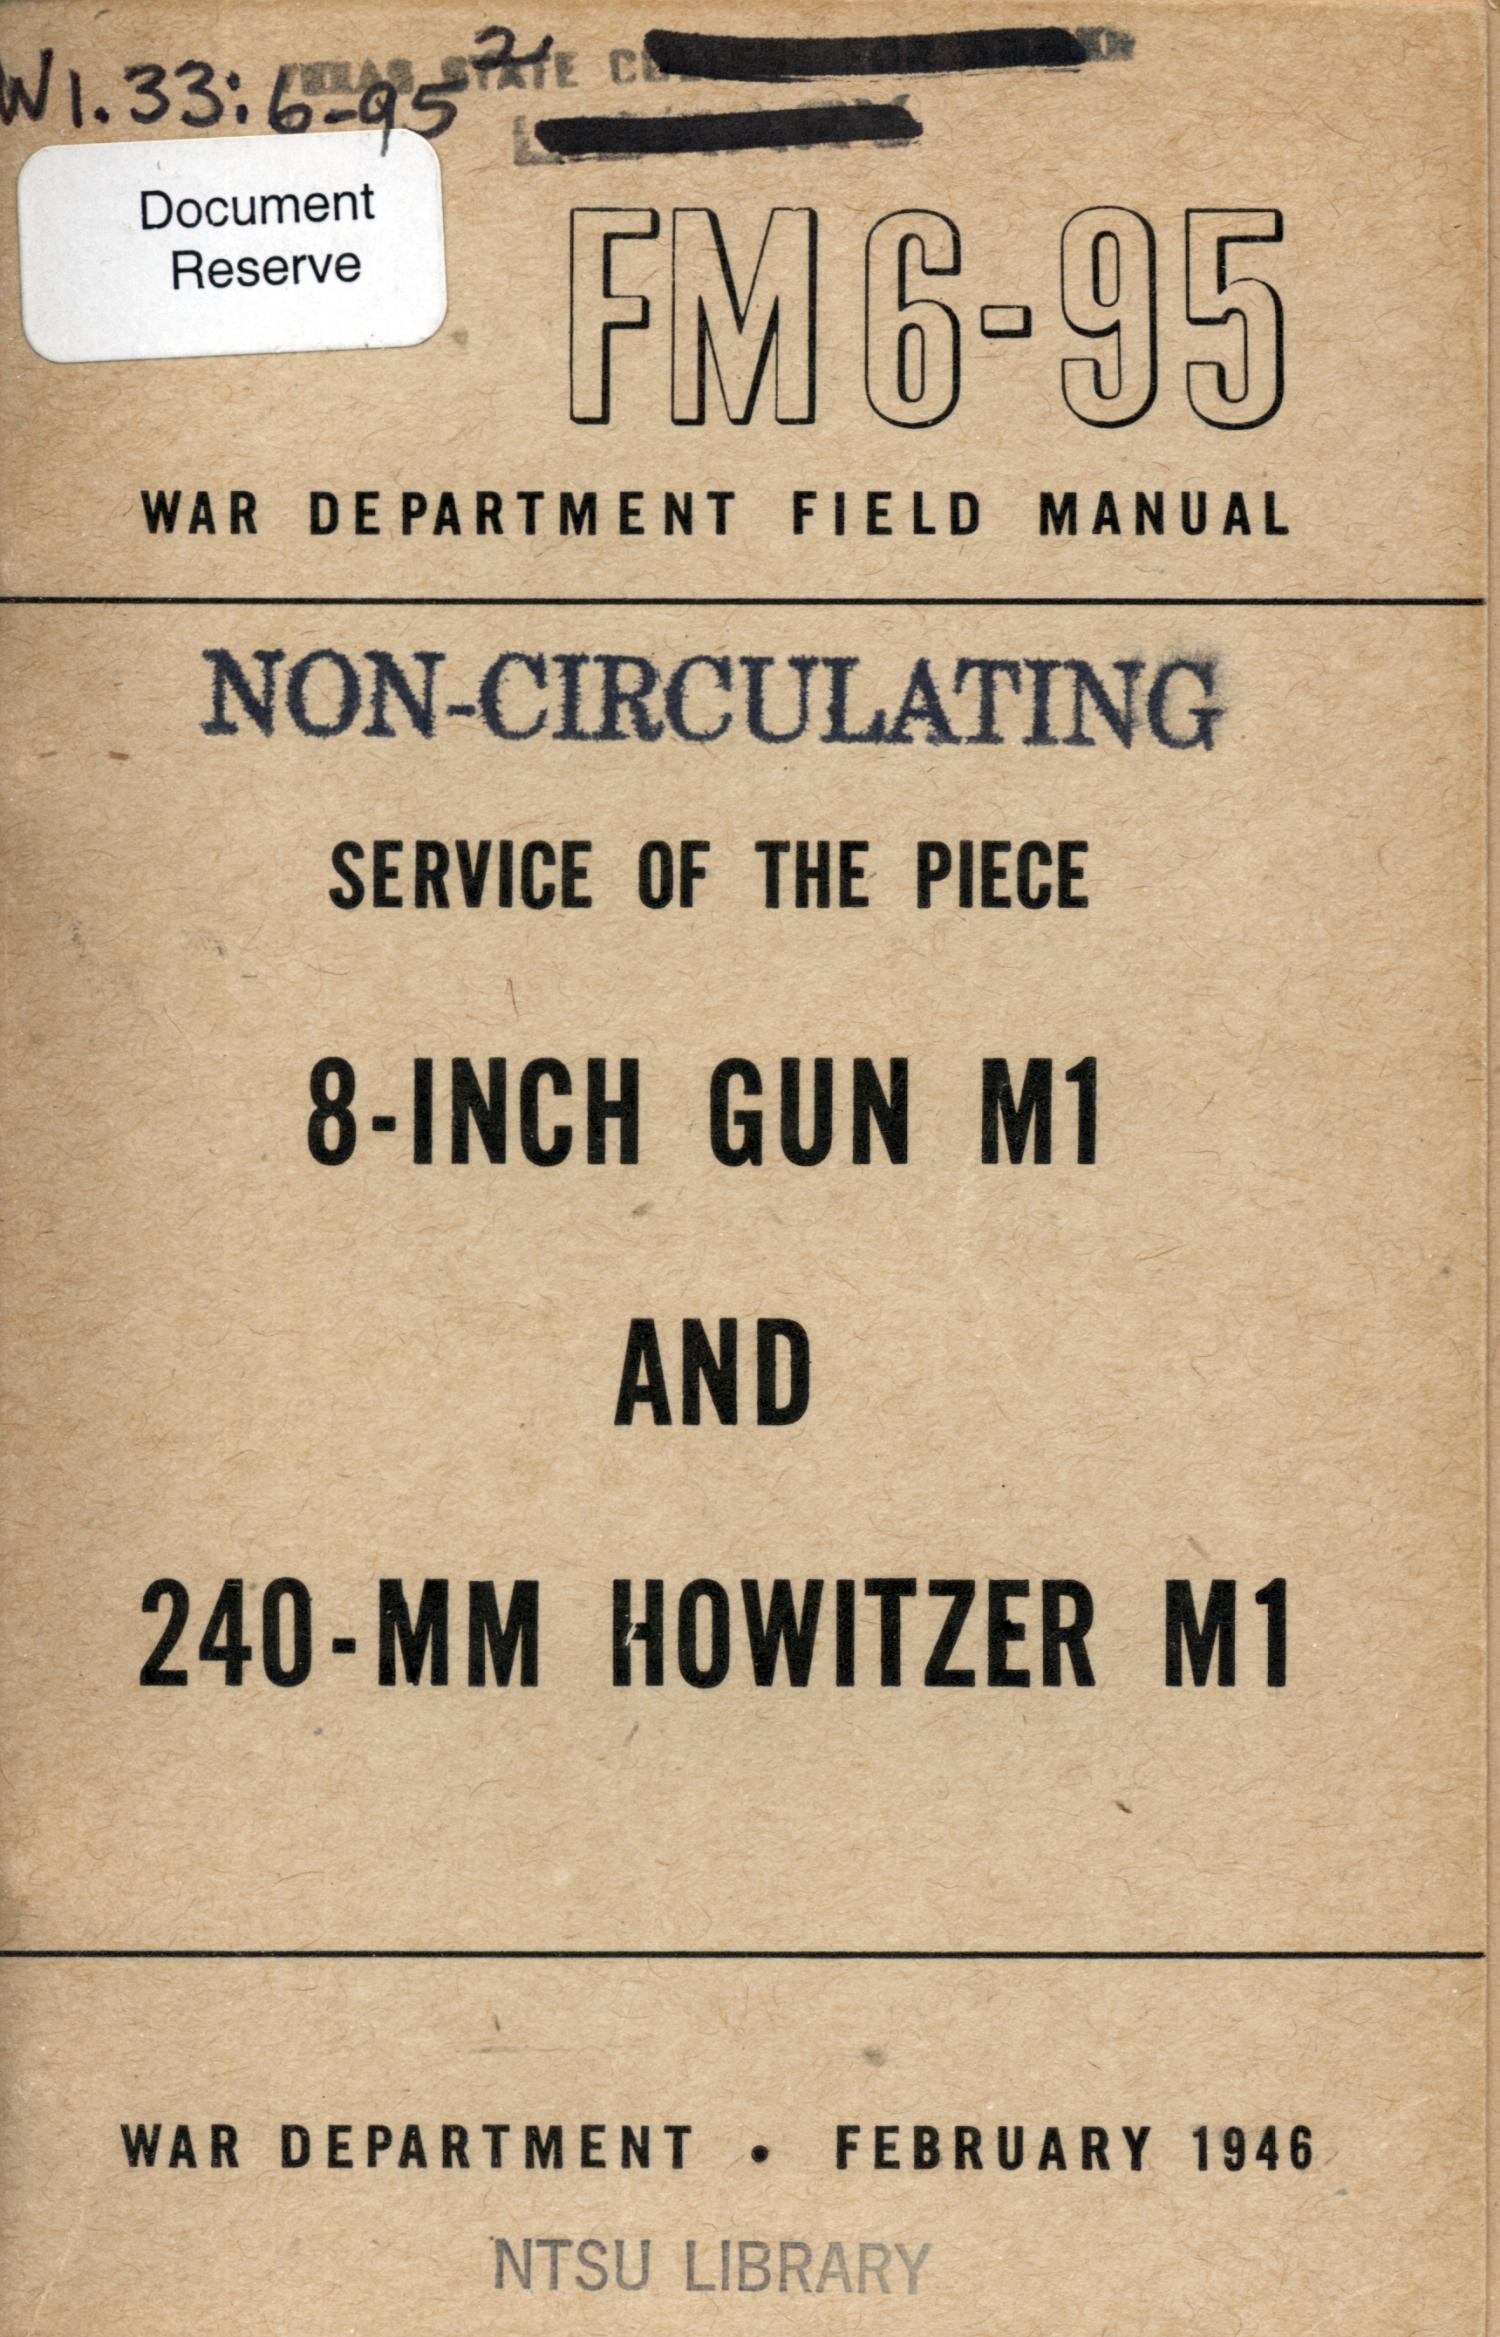 Service of the piece, 8-inch gun M1 and 240-MM howitzer M1.
                                                
                                                    Front Cover
                                                